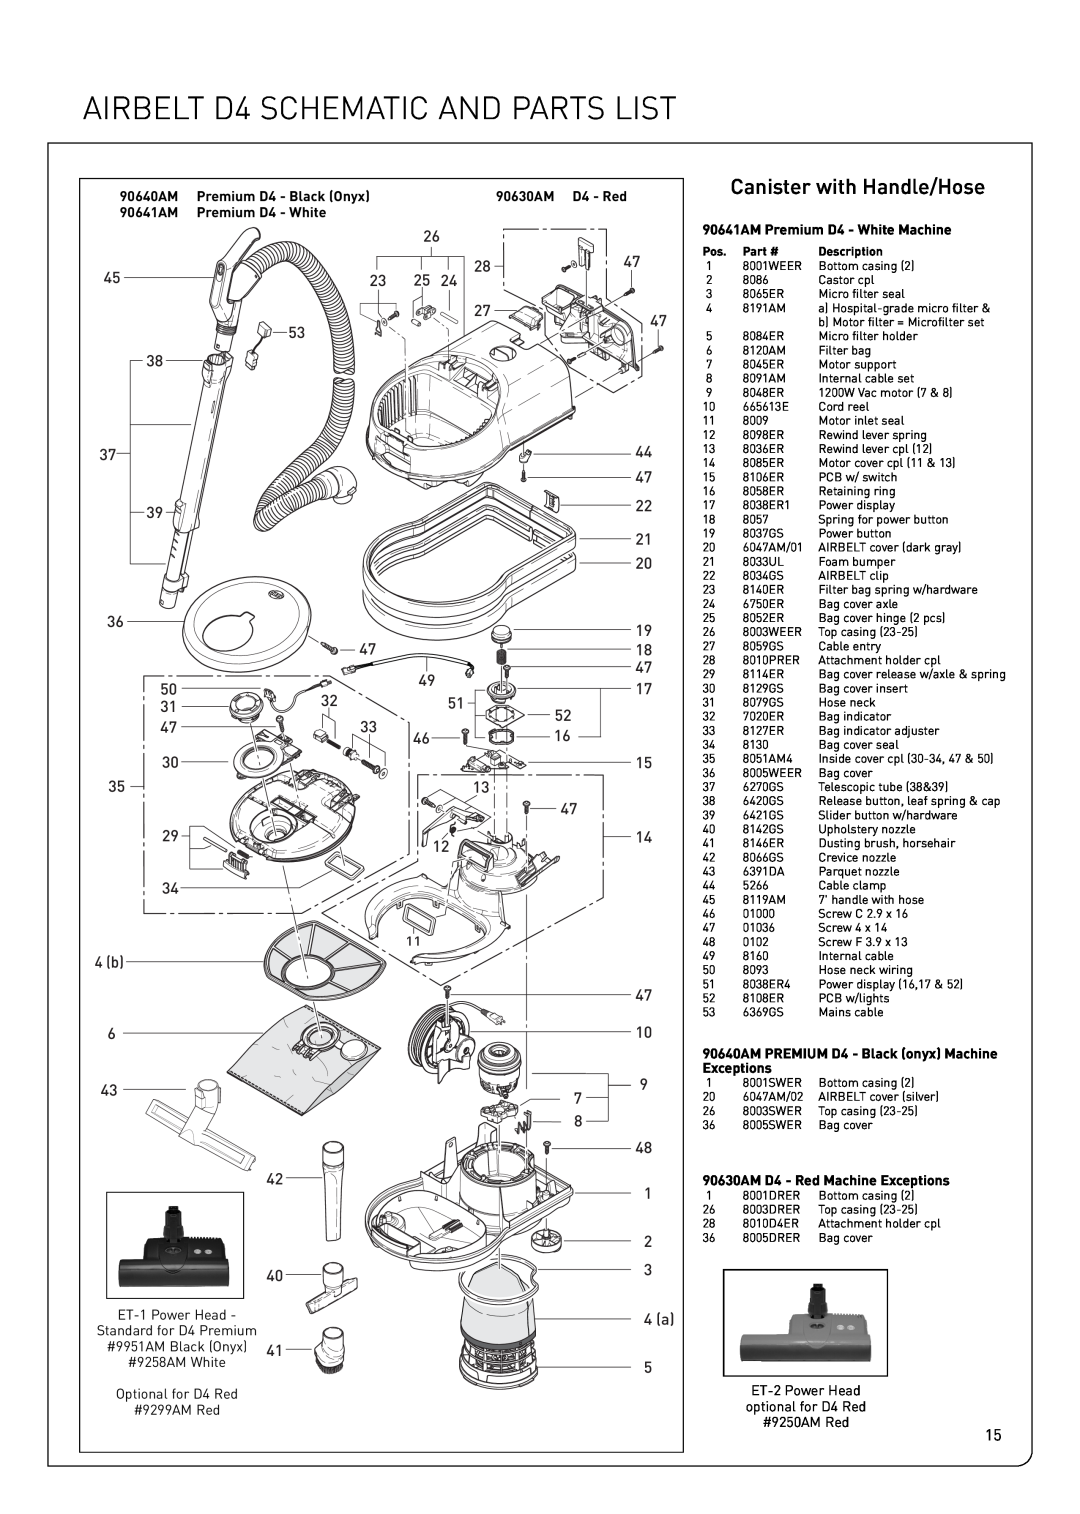 Sebo Airbelt D owner manual AIRBELT D4 SCHEMATIC AND PARTS LIST, Canister with Handle/Hose 